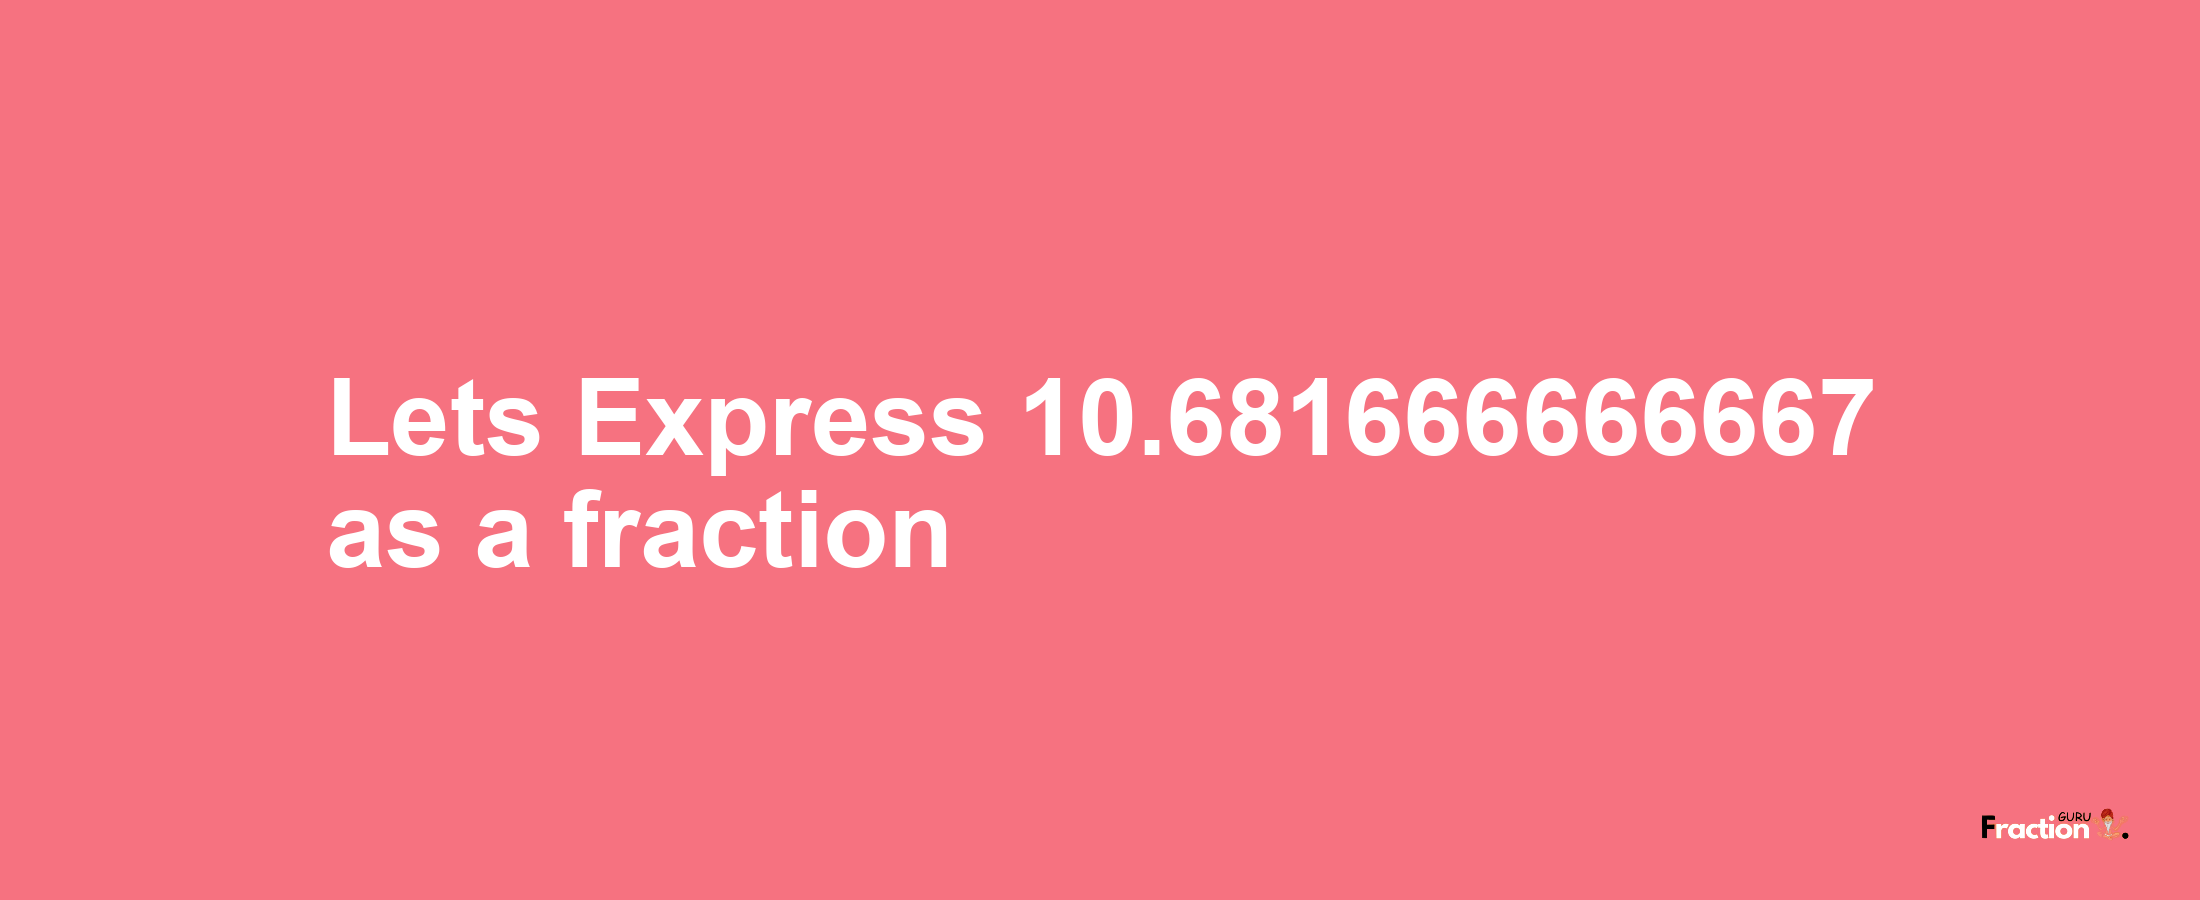 Lets Express 10.681666666667 as afraction